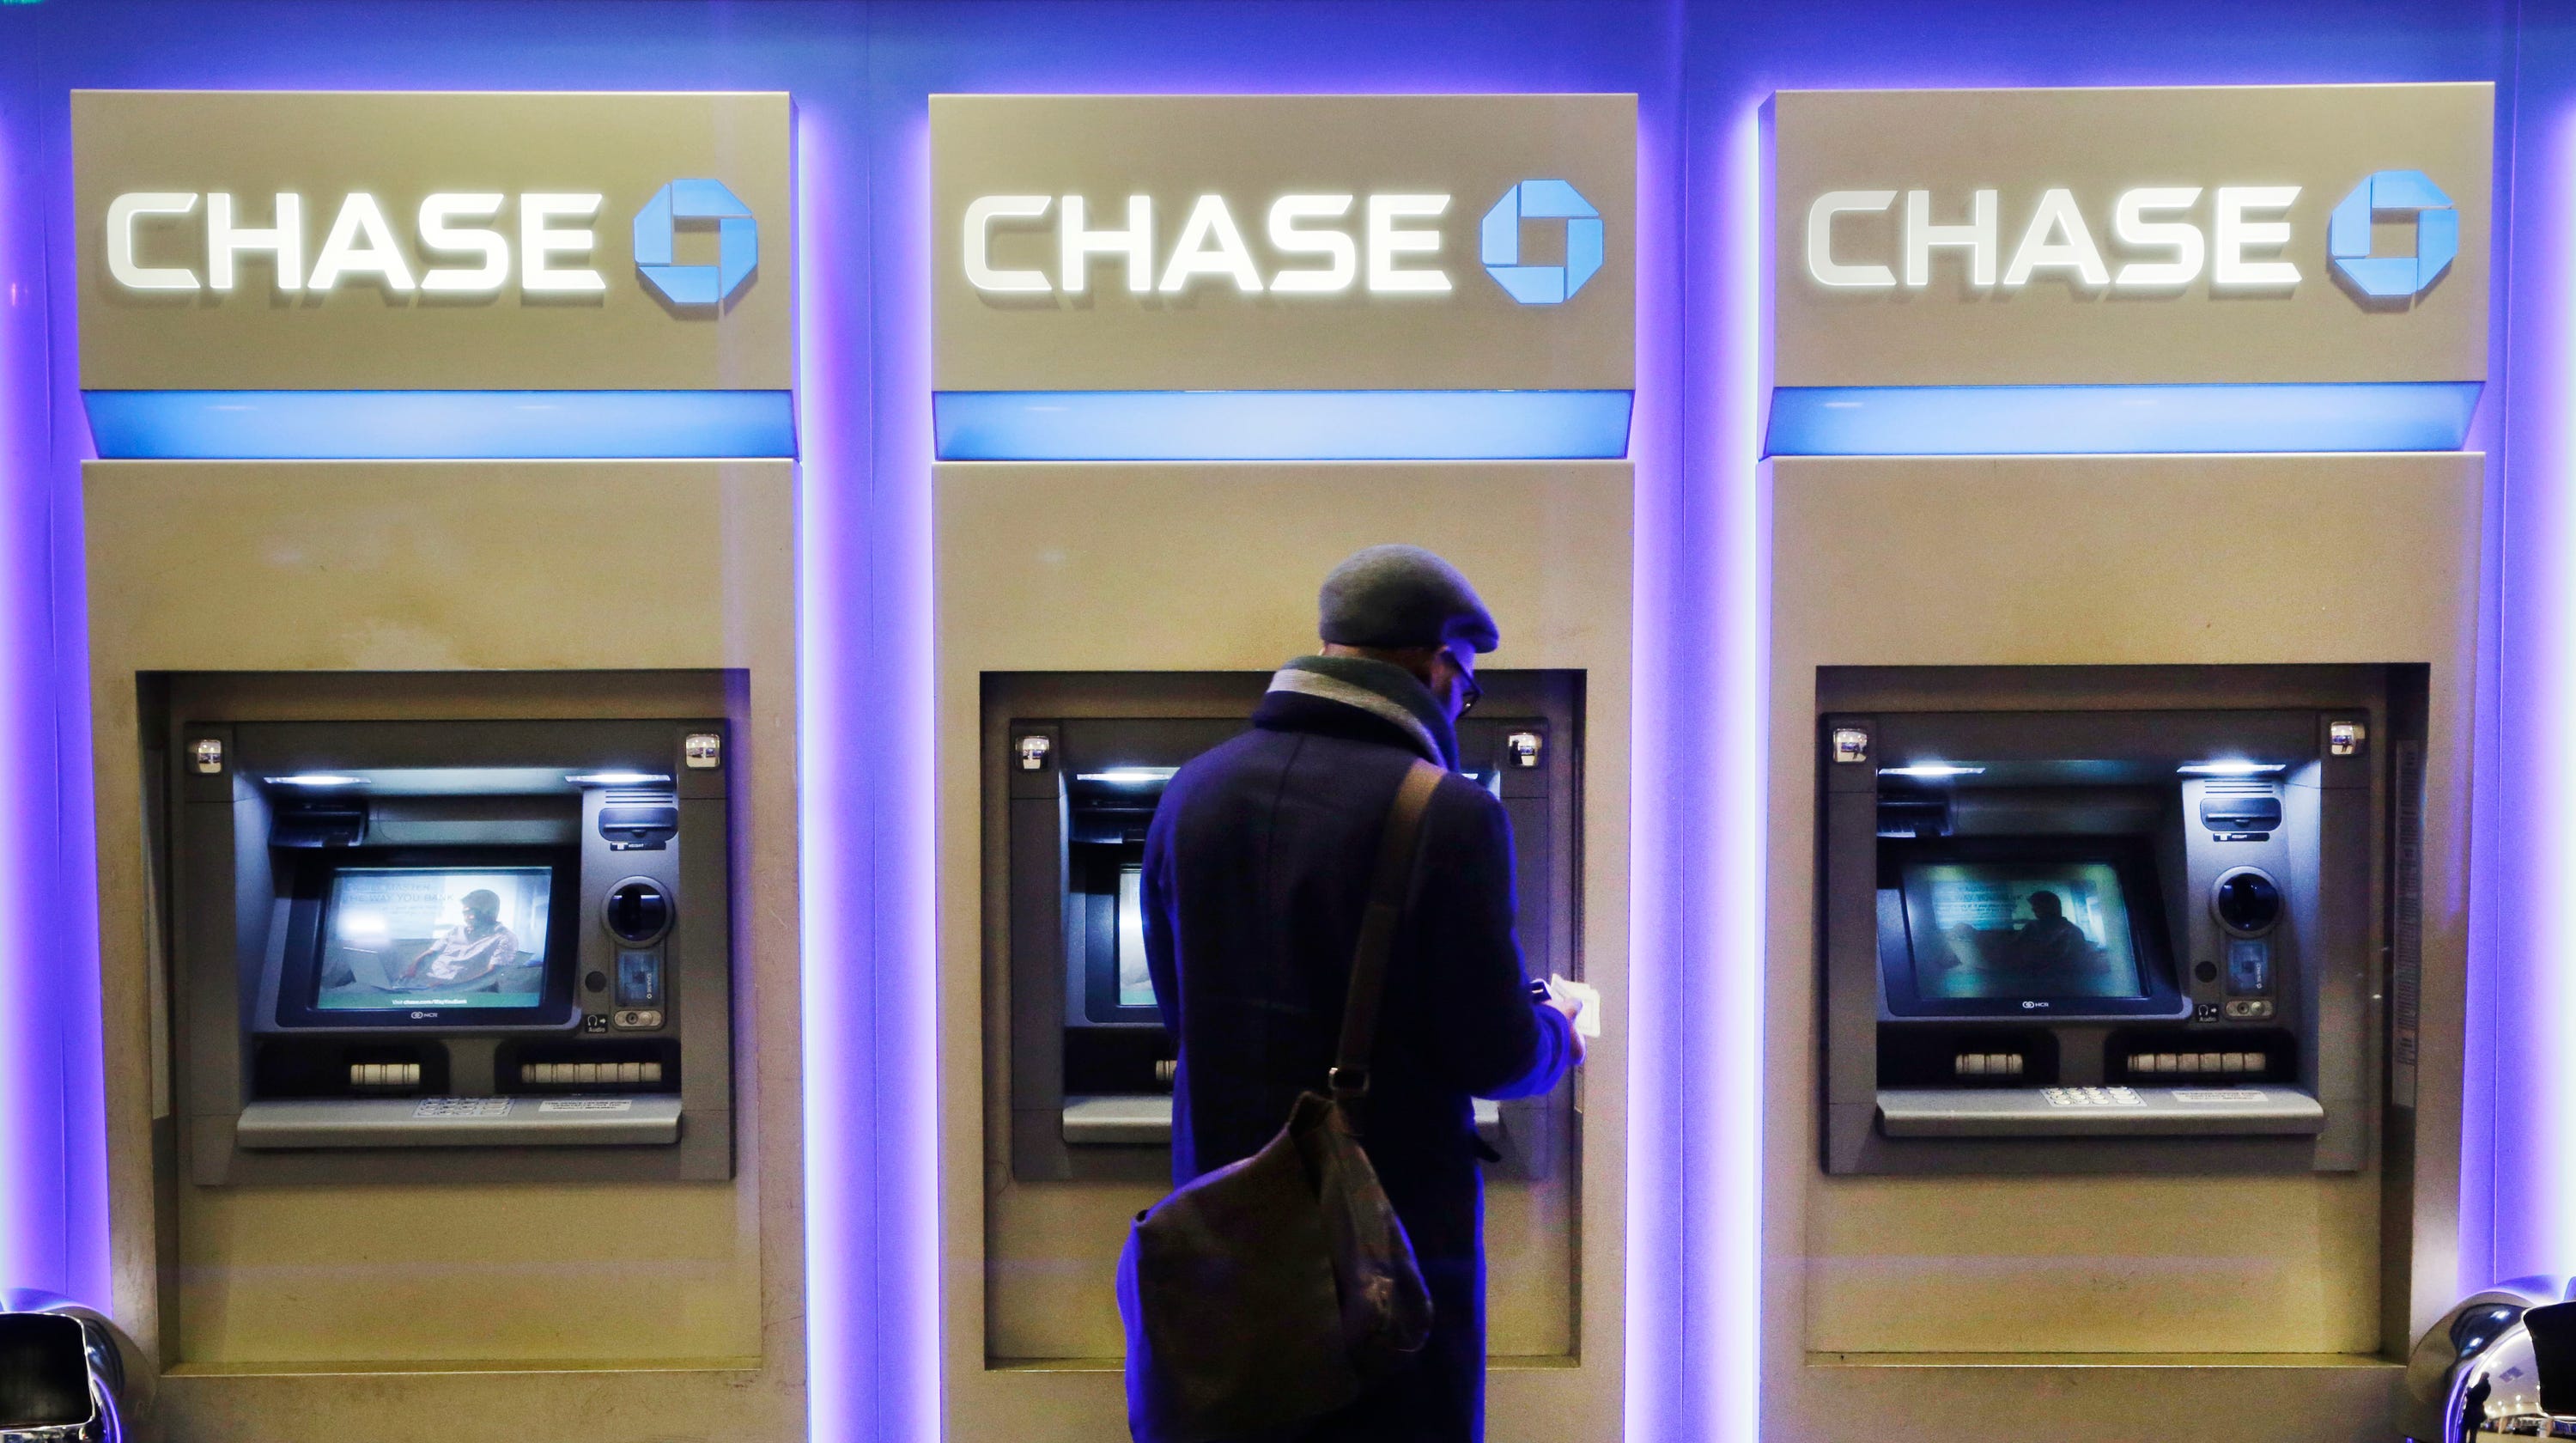 JPMorgan Chase Sapphire checking account offers credit card-like perks